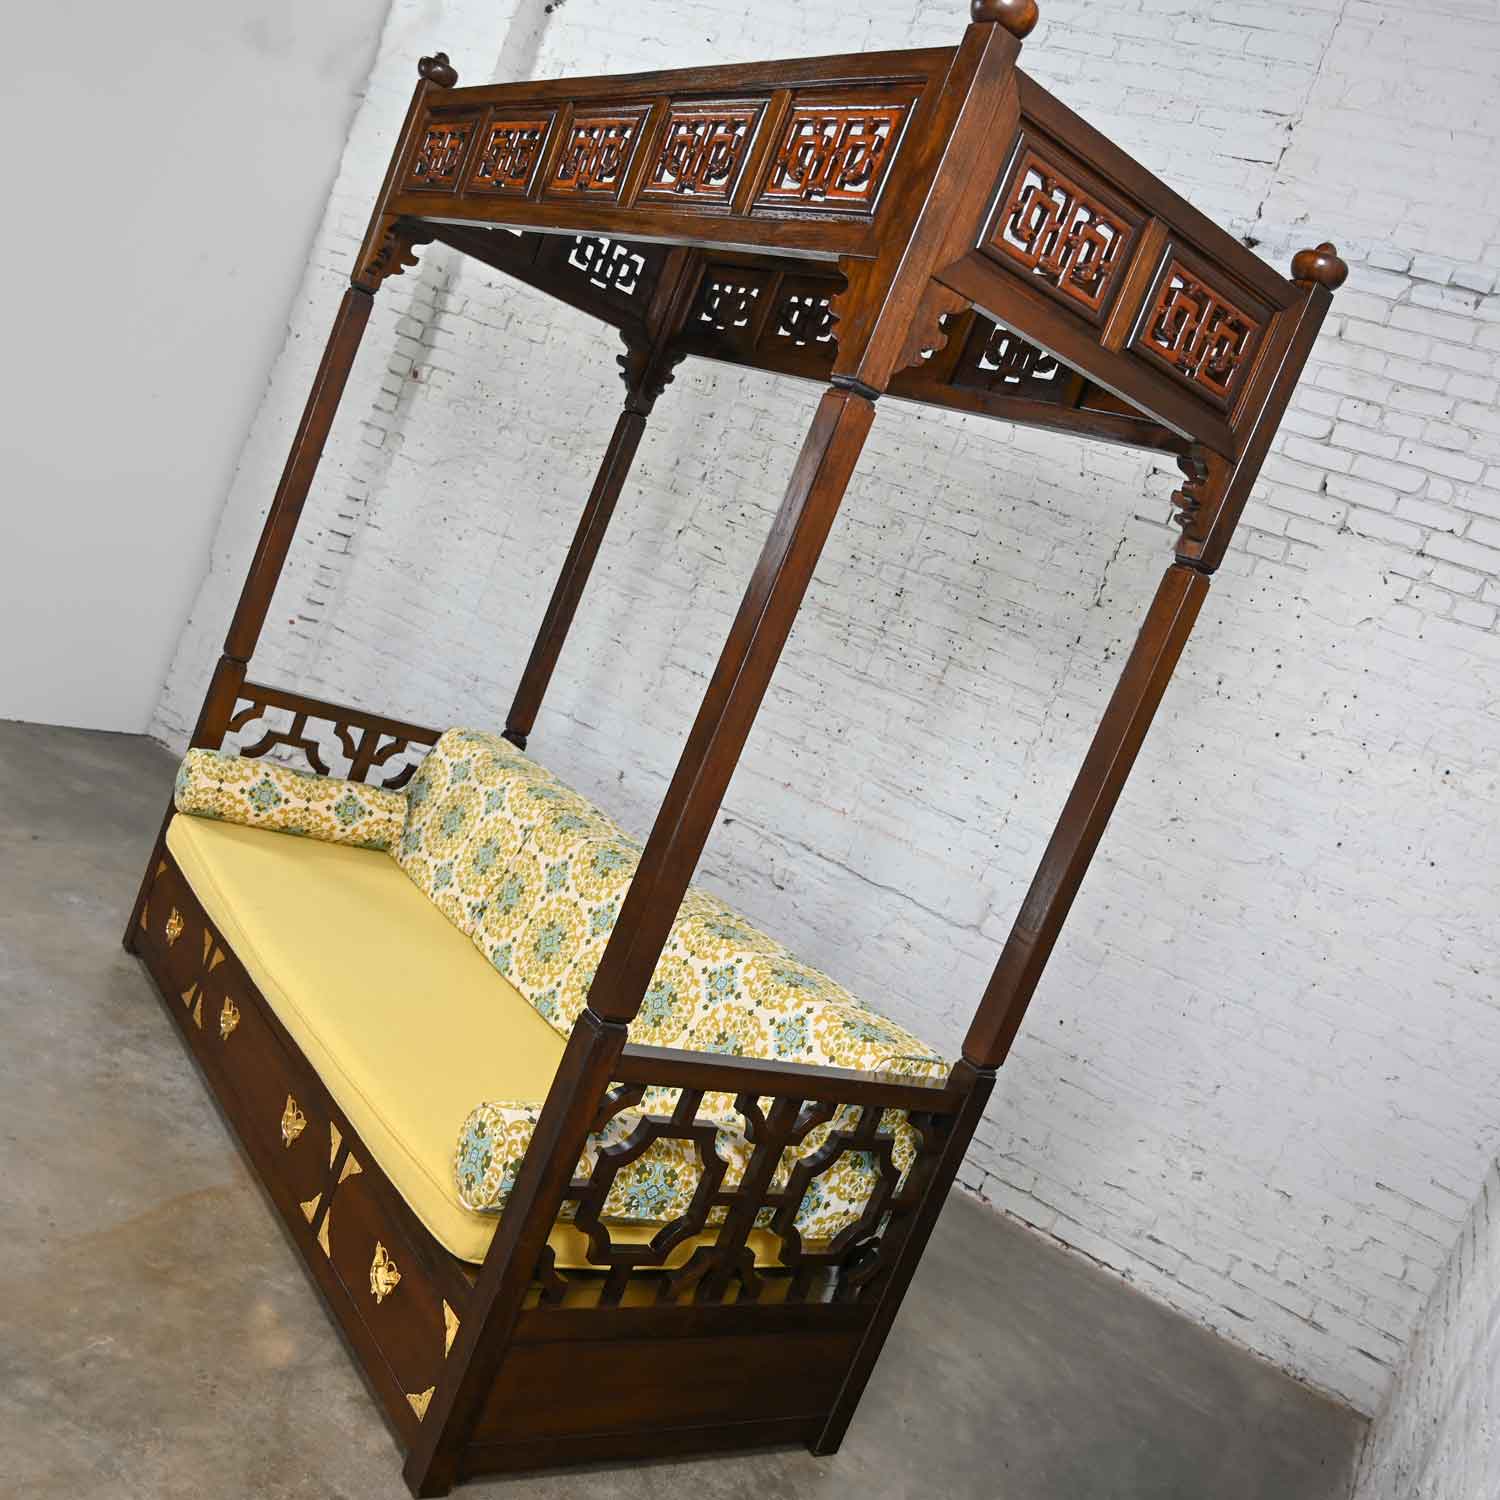 Vintage Chinoiserie Hand Carved Canopy Daybed in the Style of a Chinese Wedding Bed